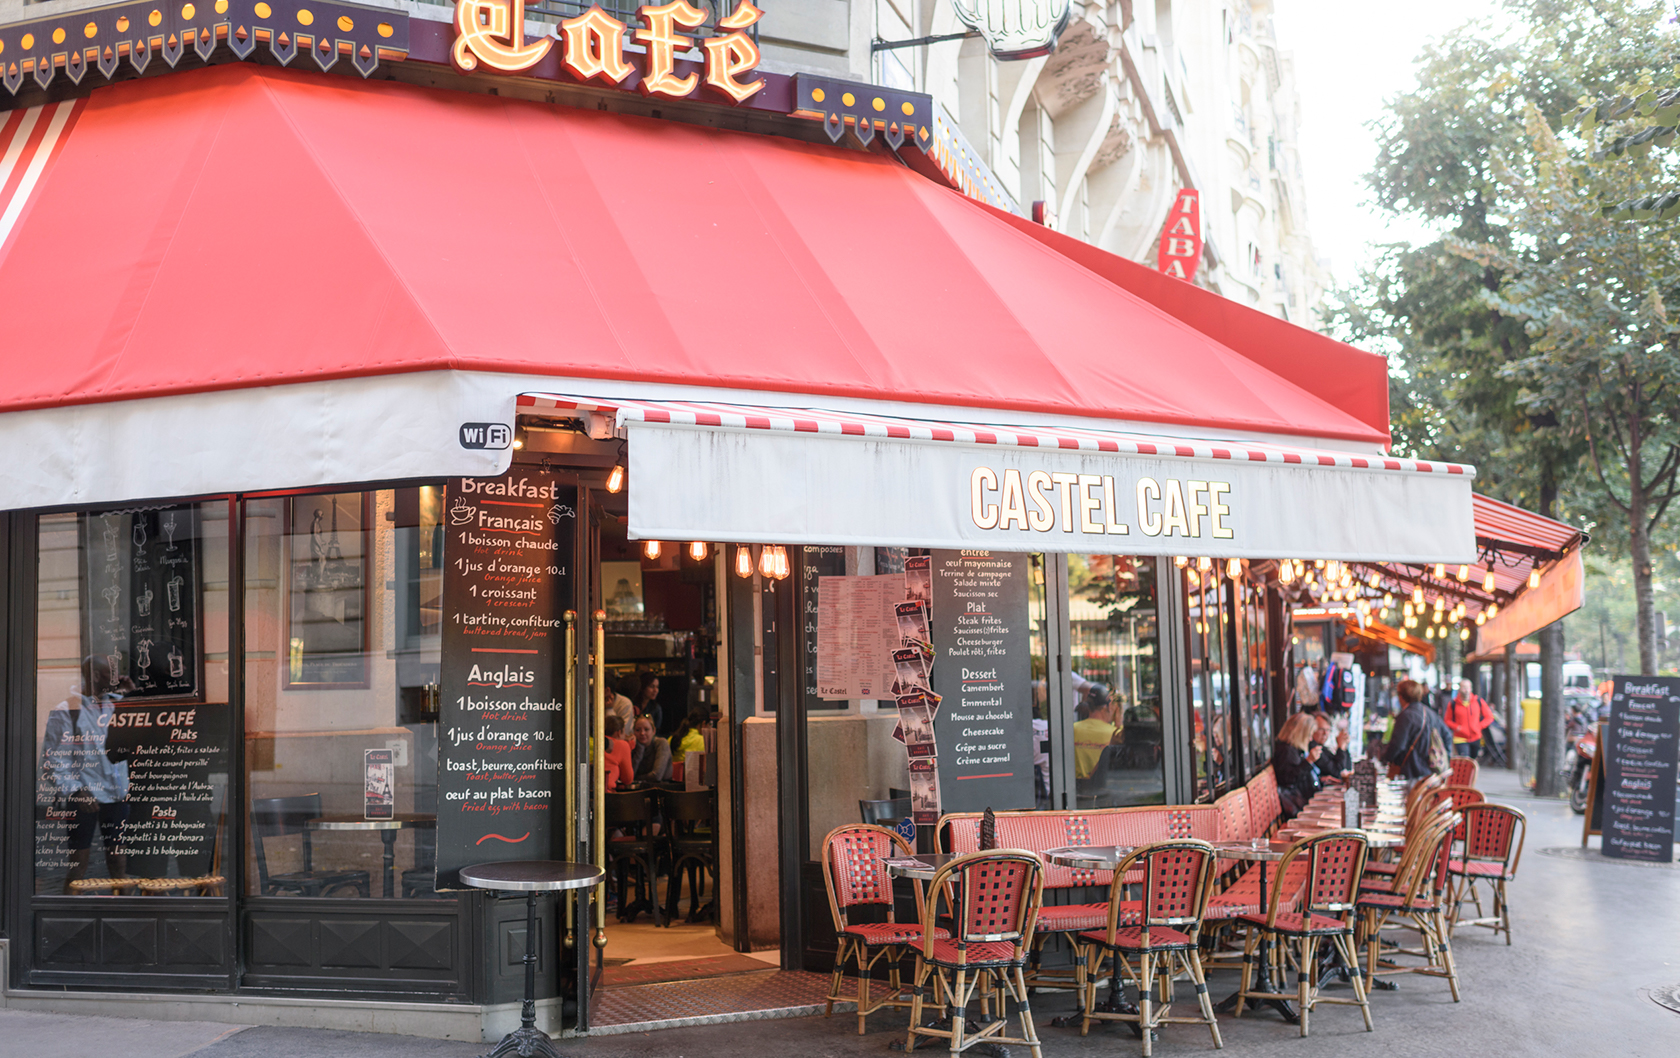 Seven Top Terraces for Dining in the 7th Arrondissement - Paris Perfect